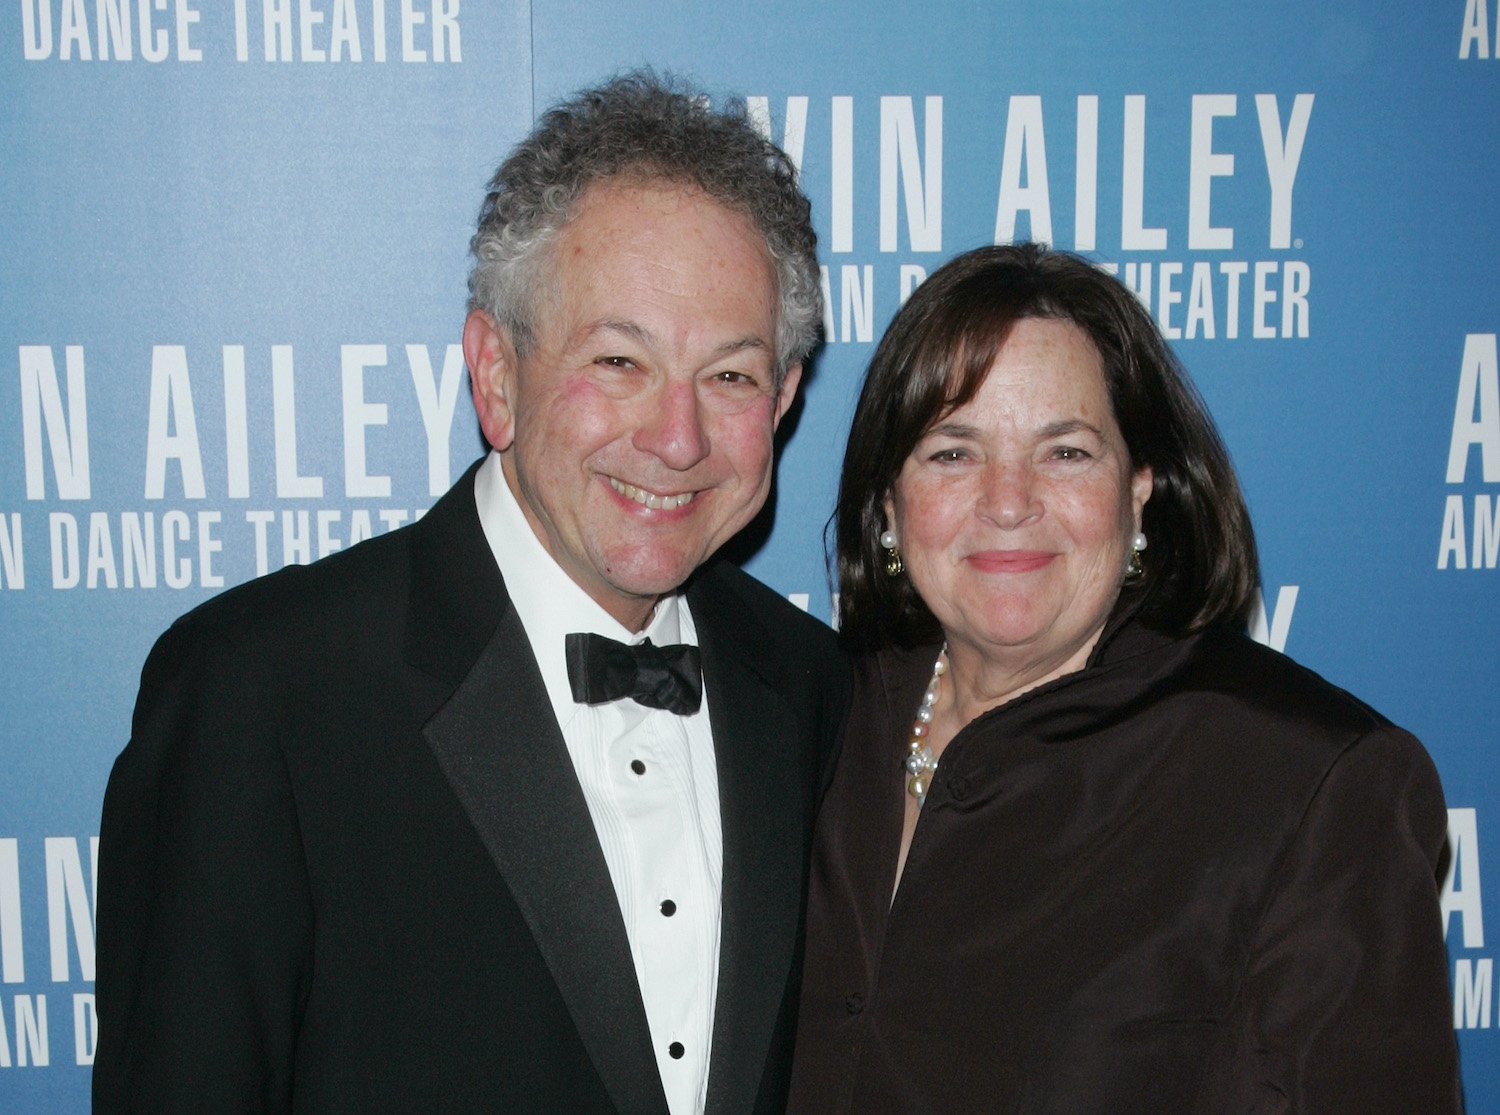 Jeffrey and Ina Garten attend the Alvin Ailey American Dance Theater Opening Night Gala